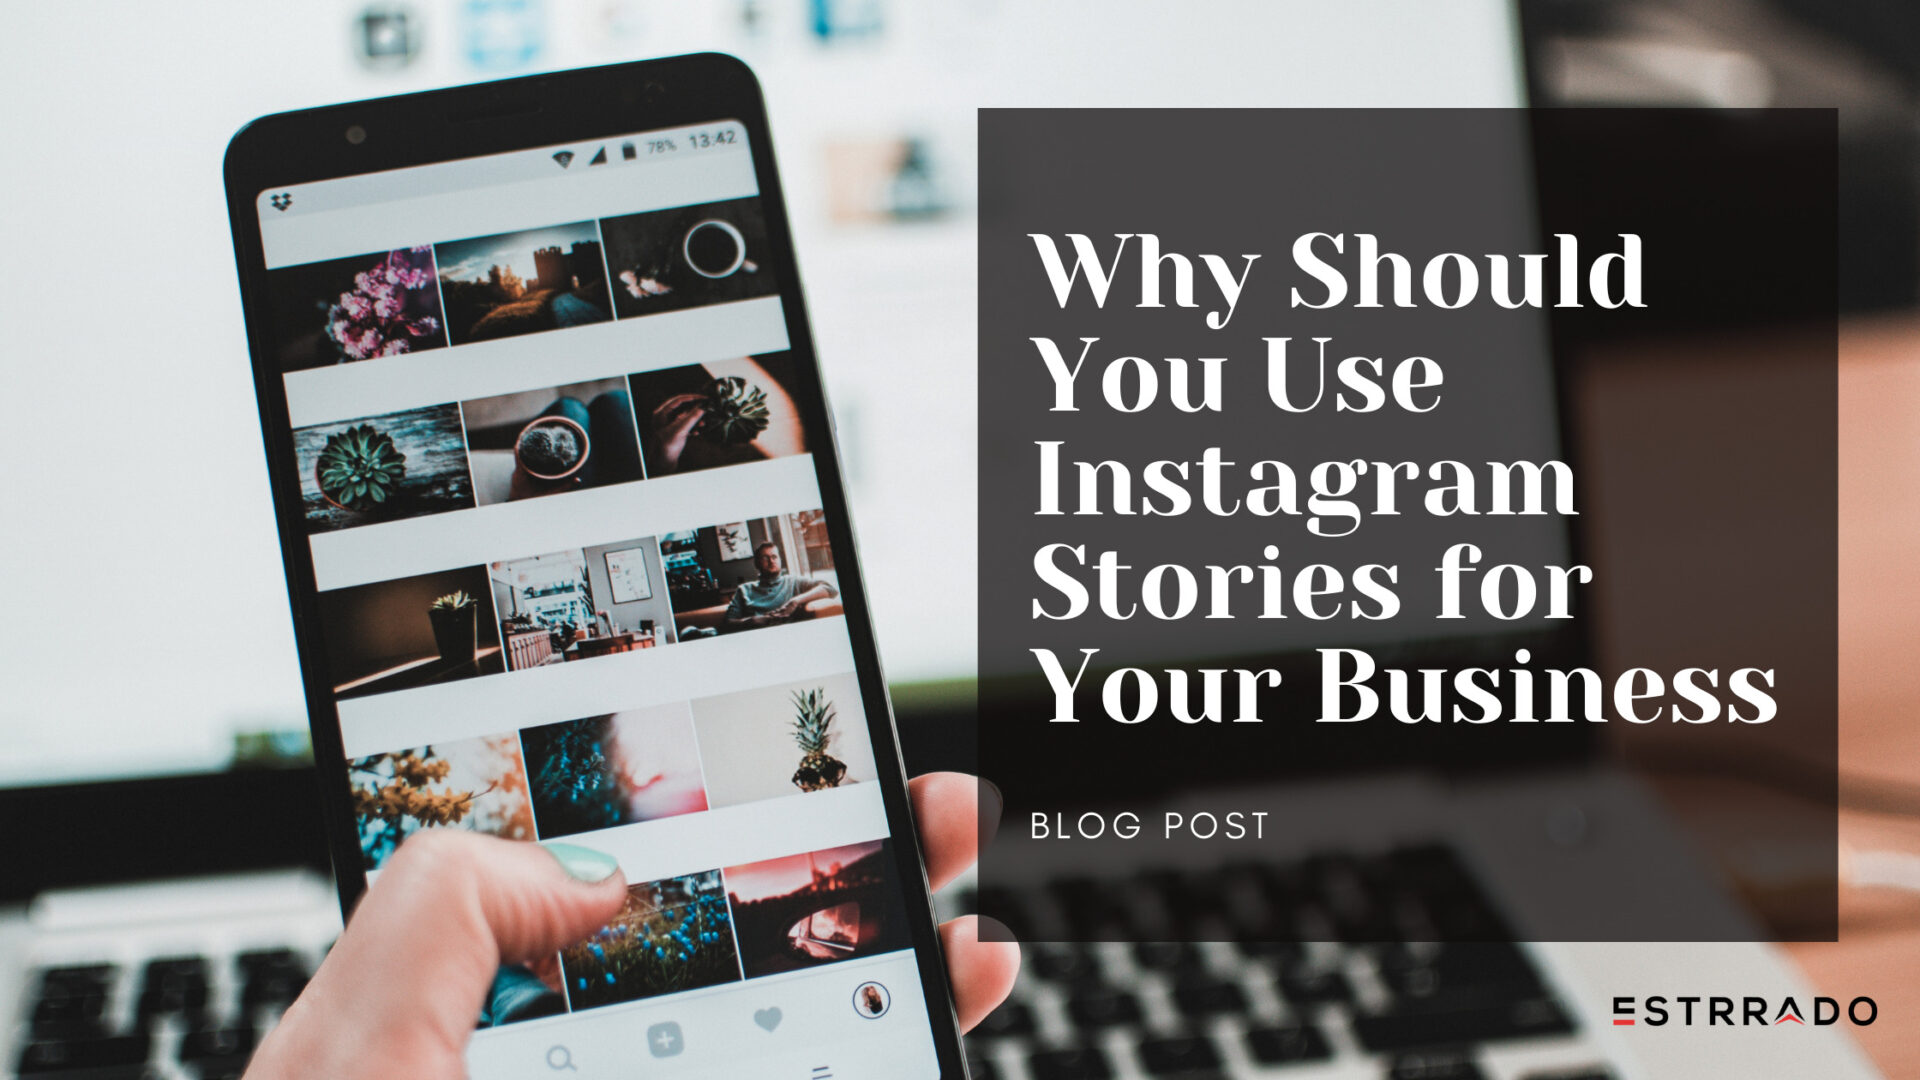 Why Should You Use Instagram Stories for Your Business - Estrrado